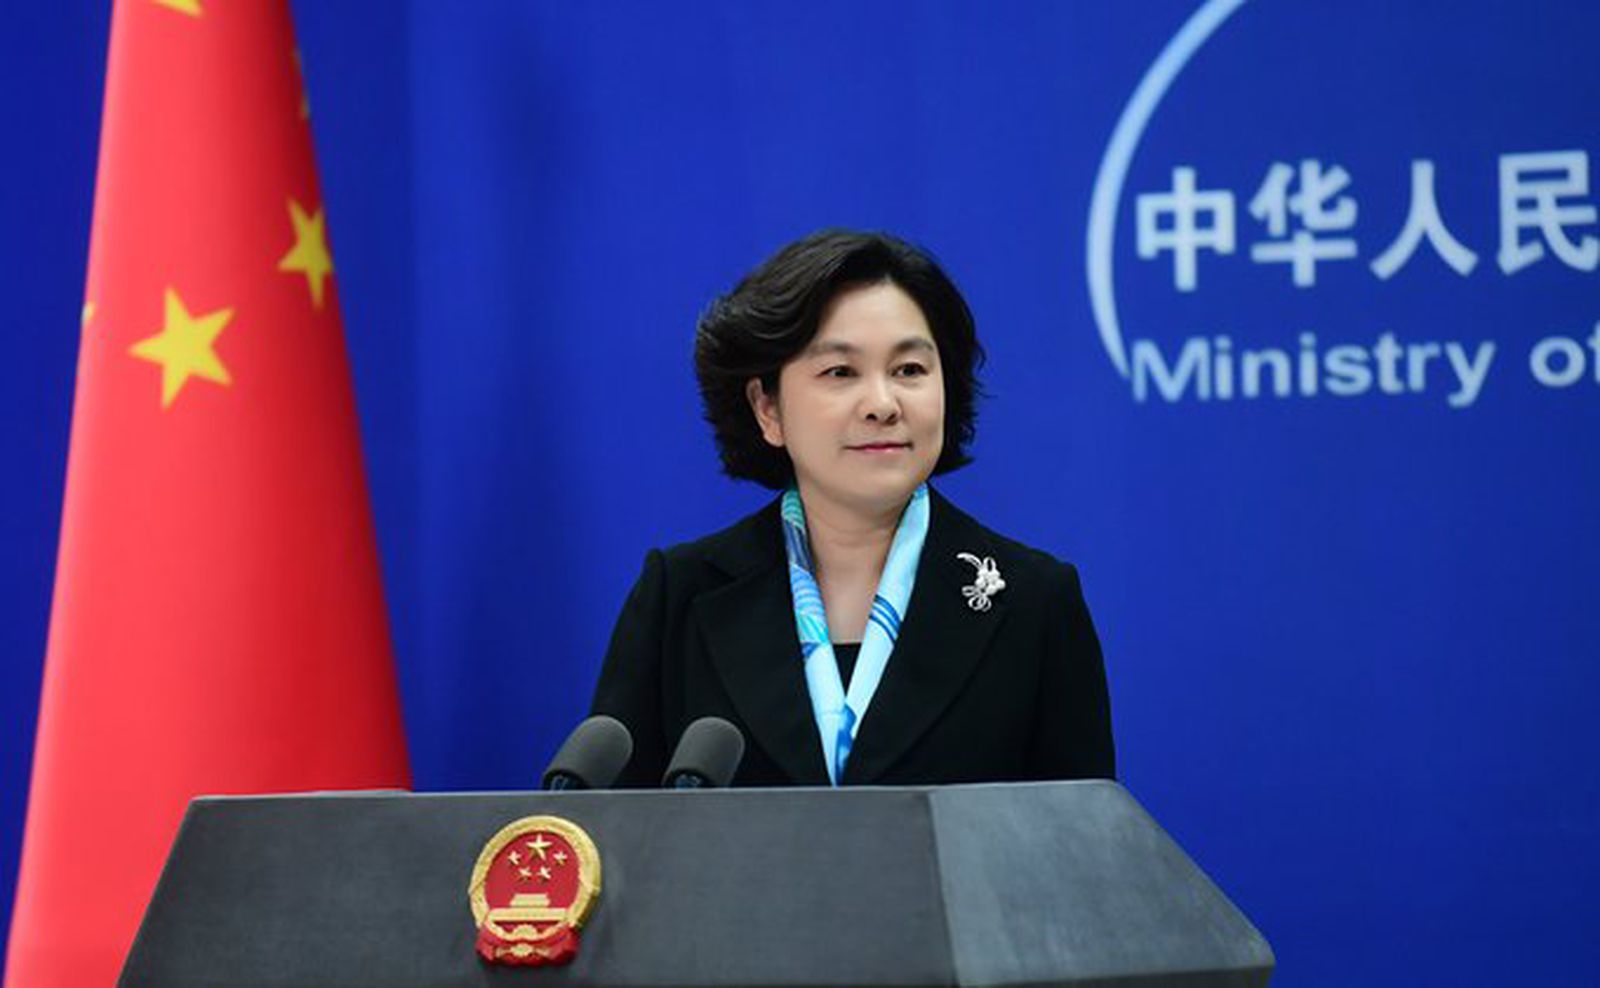 Hua Chunying threatens to reconsider bilateral ties in heated exchange ...